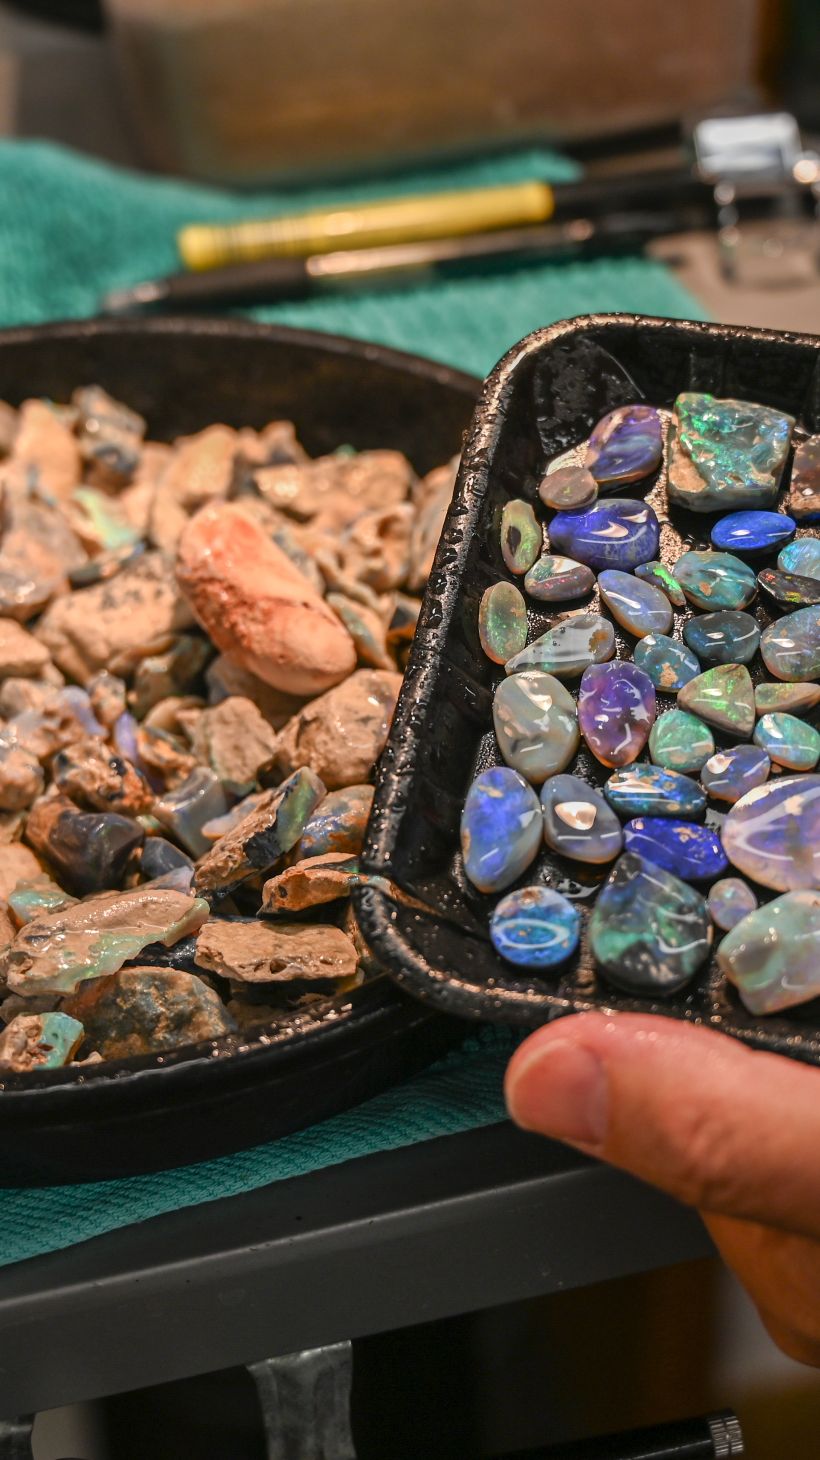 A photo of two plates, one with rubbed back opals, which are blue or green, and the other with rough opals that have been sprayed with water.